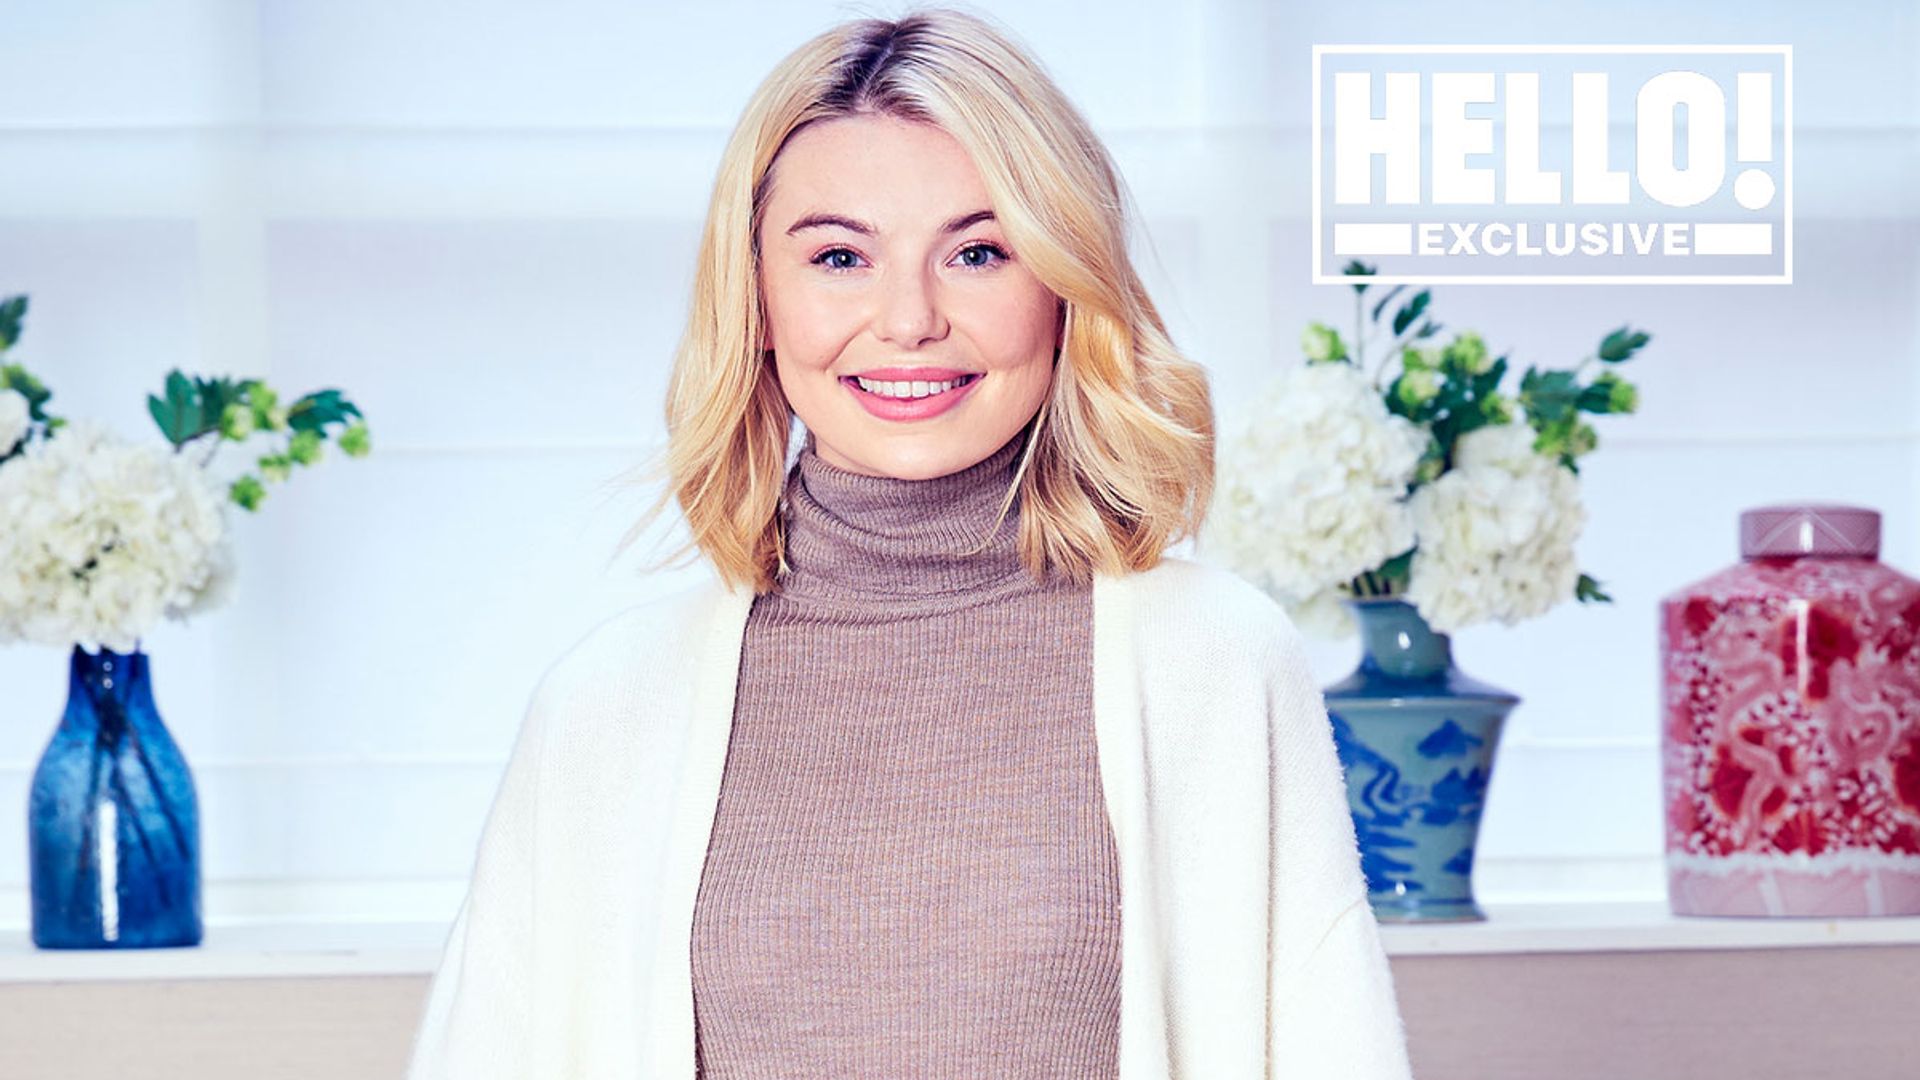 Georgia Toffolo joins HELLO! to bring a weekly dose of good news